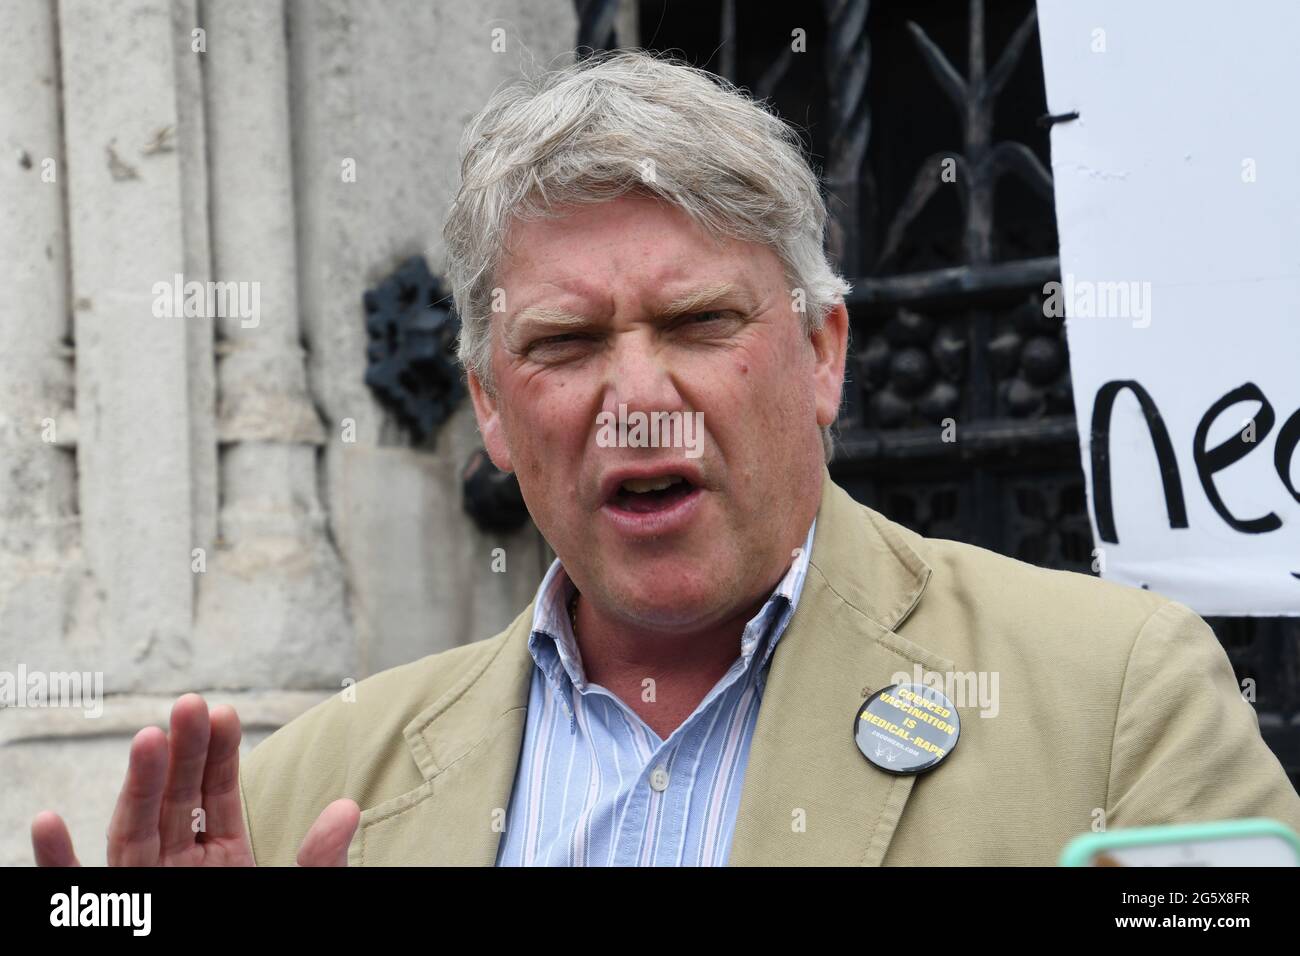 On 30 June 2021, Speaker Jeff Wyatt at Resist, Defy, Do NOT Comply! - No More Lockdowns protest NoVaccinePassport of the anti-vaccine and anti-lockdown, claimed the British government was corrupt in order to control the freedom of British citizens at Parliament Square, London, UK. Stock Photo